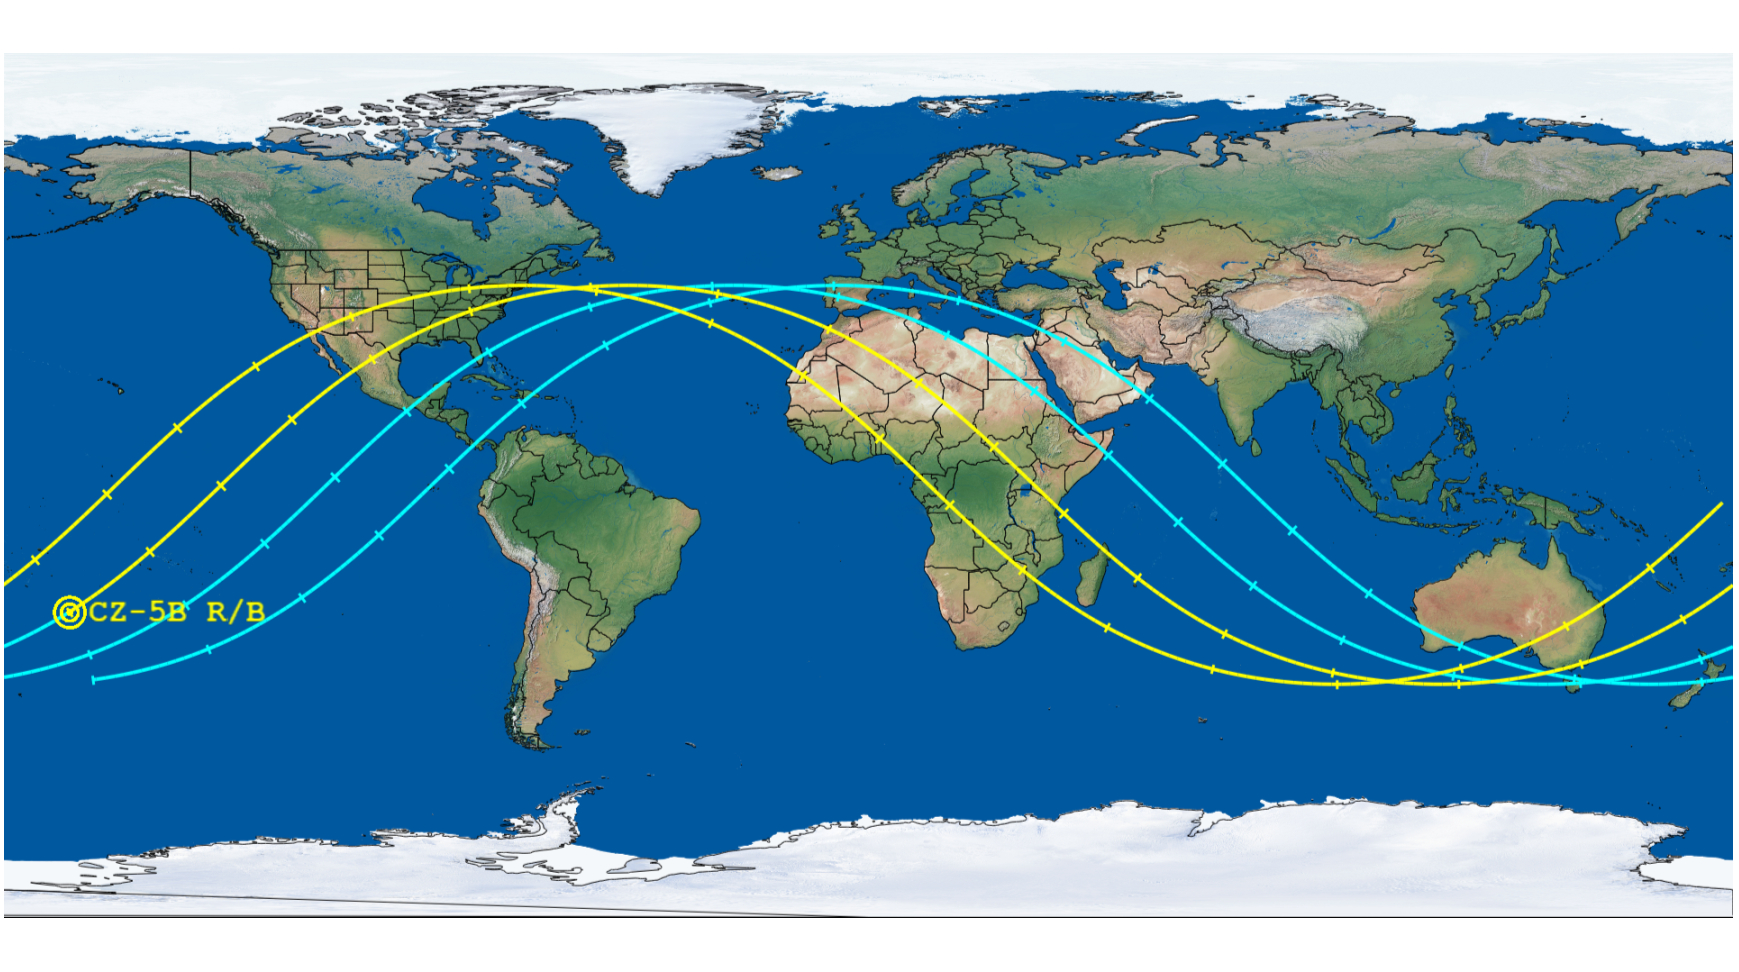 This map shows the possible areas where China's huge Long March 5B rocket debris could fall to Earth. The yellow icon is the midpoint of the reentry window.